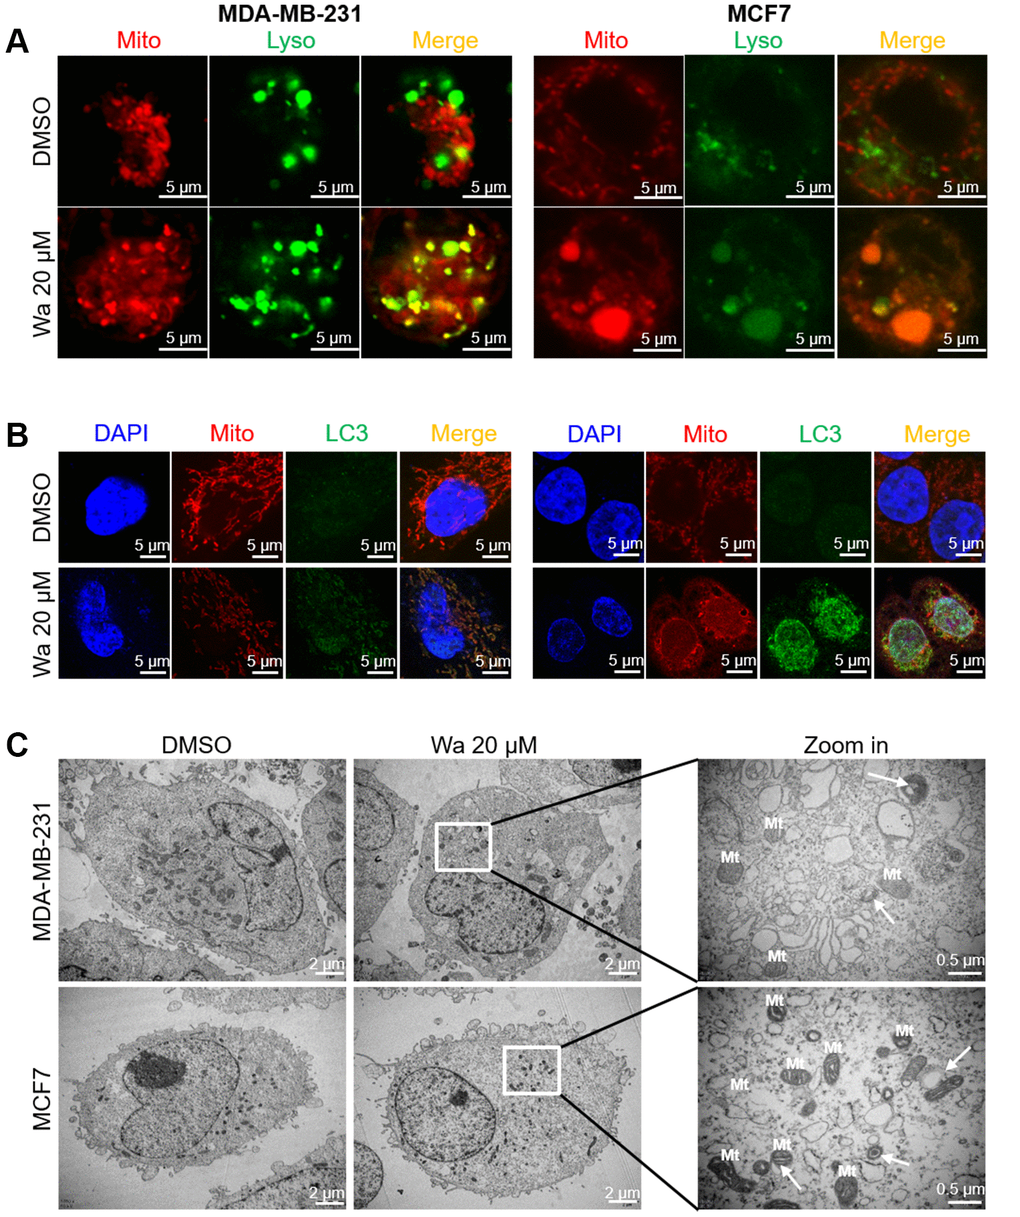 Warangalone induces cell mitophagy. MDA-MB-231 and MCF7 cells were treated with 20 μM warangalone for 12 h. A CLSM was used to observe co-staining. (A) Co-staining of lysosomes (LysoTracker™ Green DND) and mitochondria (MitoTracker™ Red CMXRos). (B) Co-staining of LC3 (labeled with Alexa Fluor 488) and mitochondria (MitoTracker™ Red CMXRos). (C) Transmission electron microscopy was used to observe mitophagy. Nuclei labeled with DAPI. Arrows indicate mitophagy.